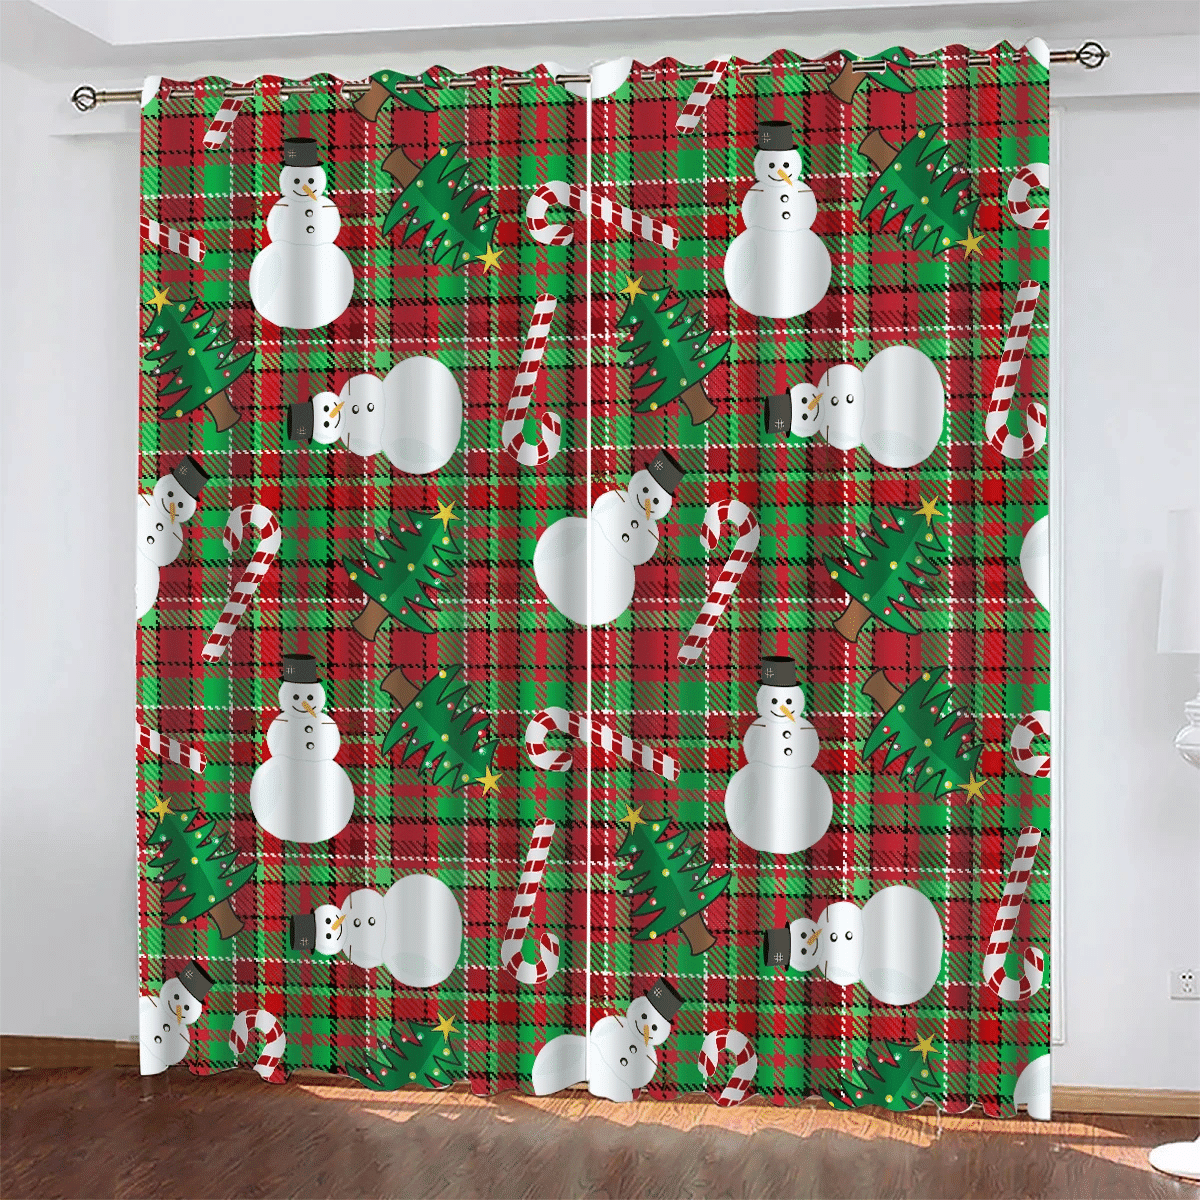 Christmas Tree Snowman And Candy On Over Checkered Window Curtains Door Curtains Home Decor